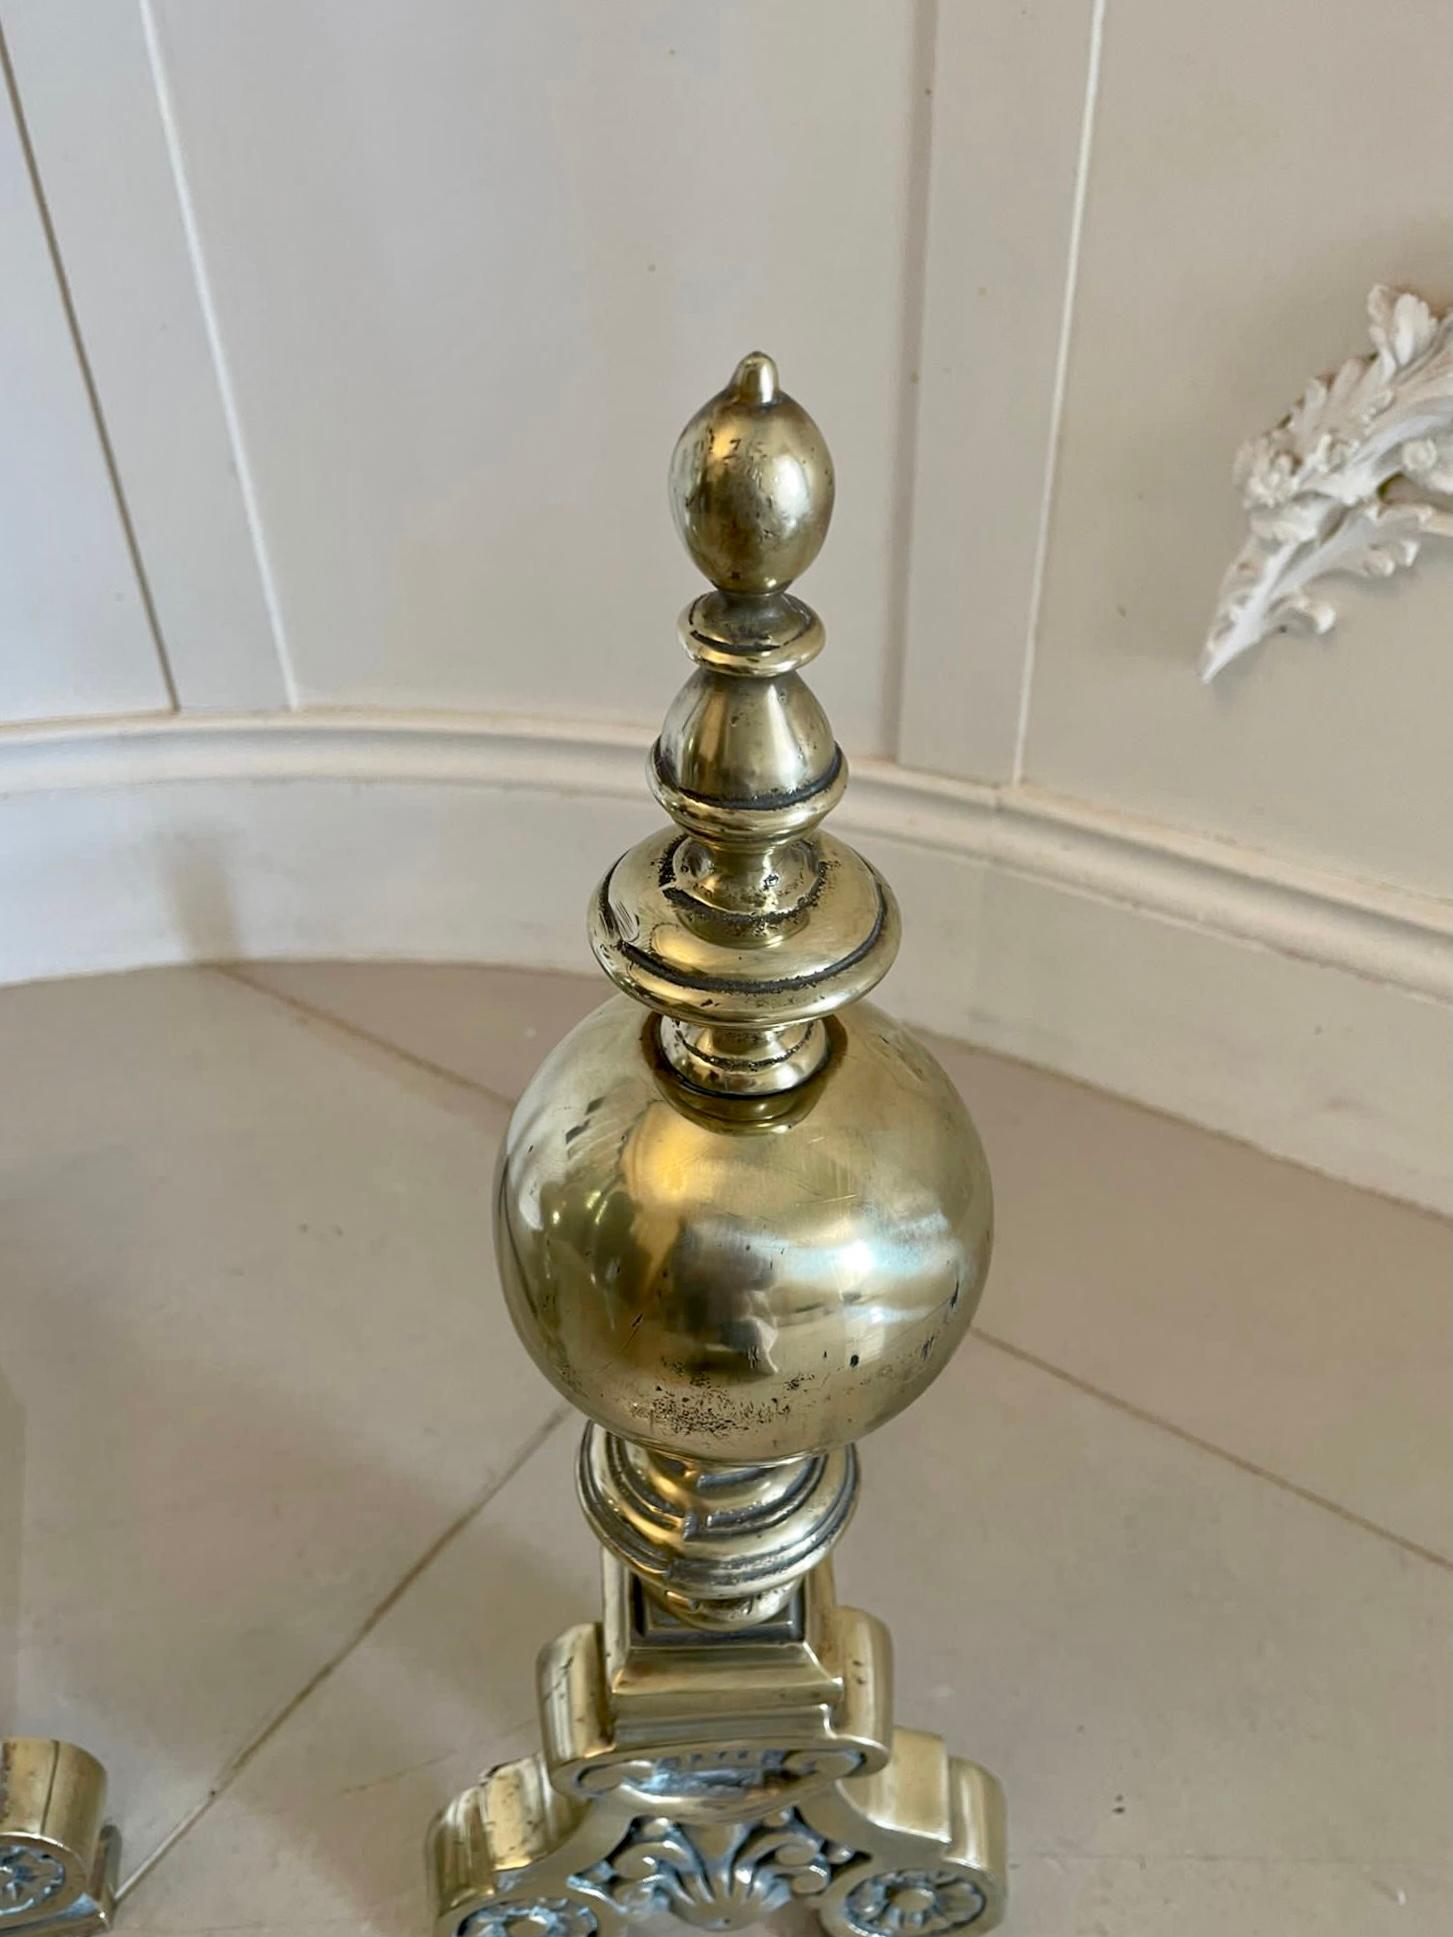 Superb quality ornate antique Victorian pair of brass fire dogs having a round ball to the top above an attractive ornate column standing on scroll feet united by an iron stand. 

Measures: H 51 x W 17 x D 37cm
Date 1850.
 